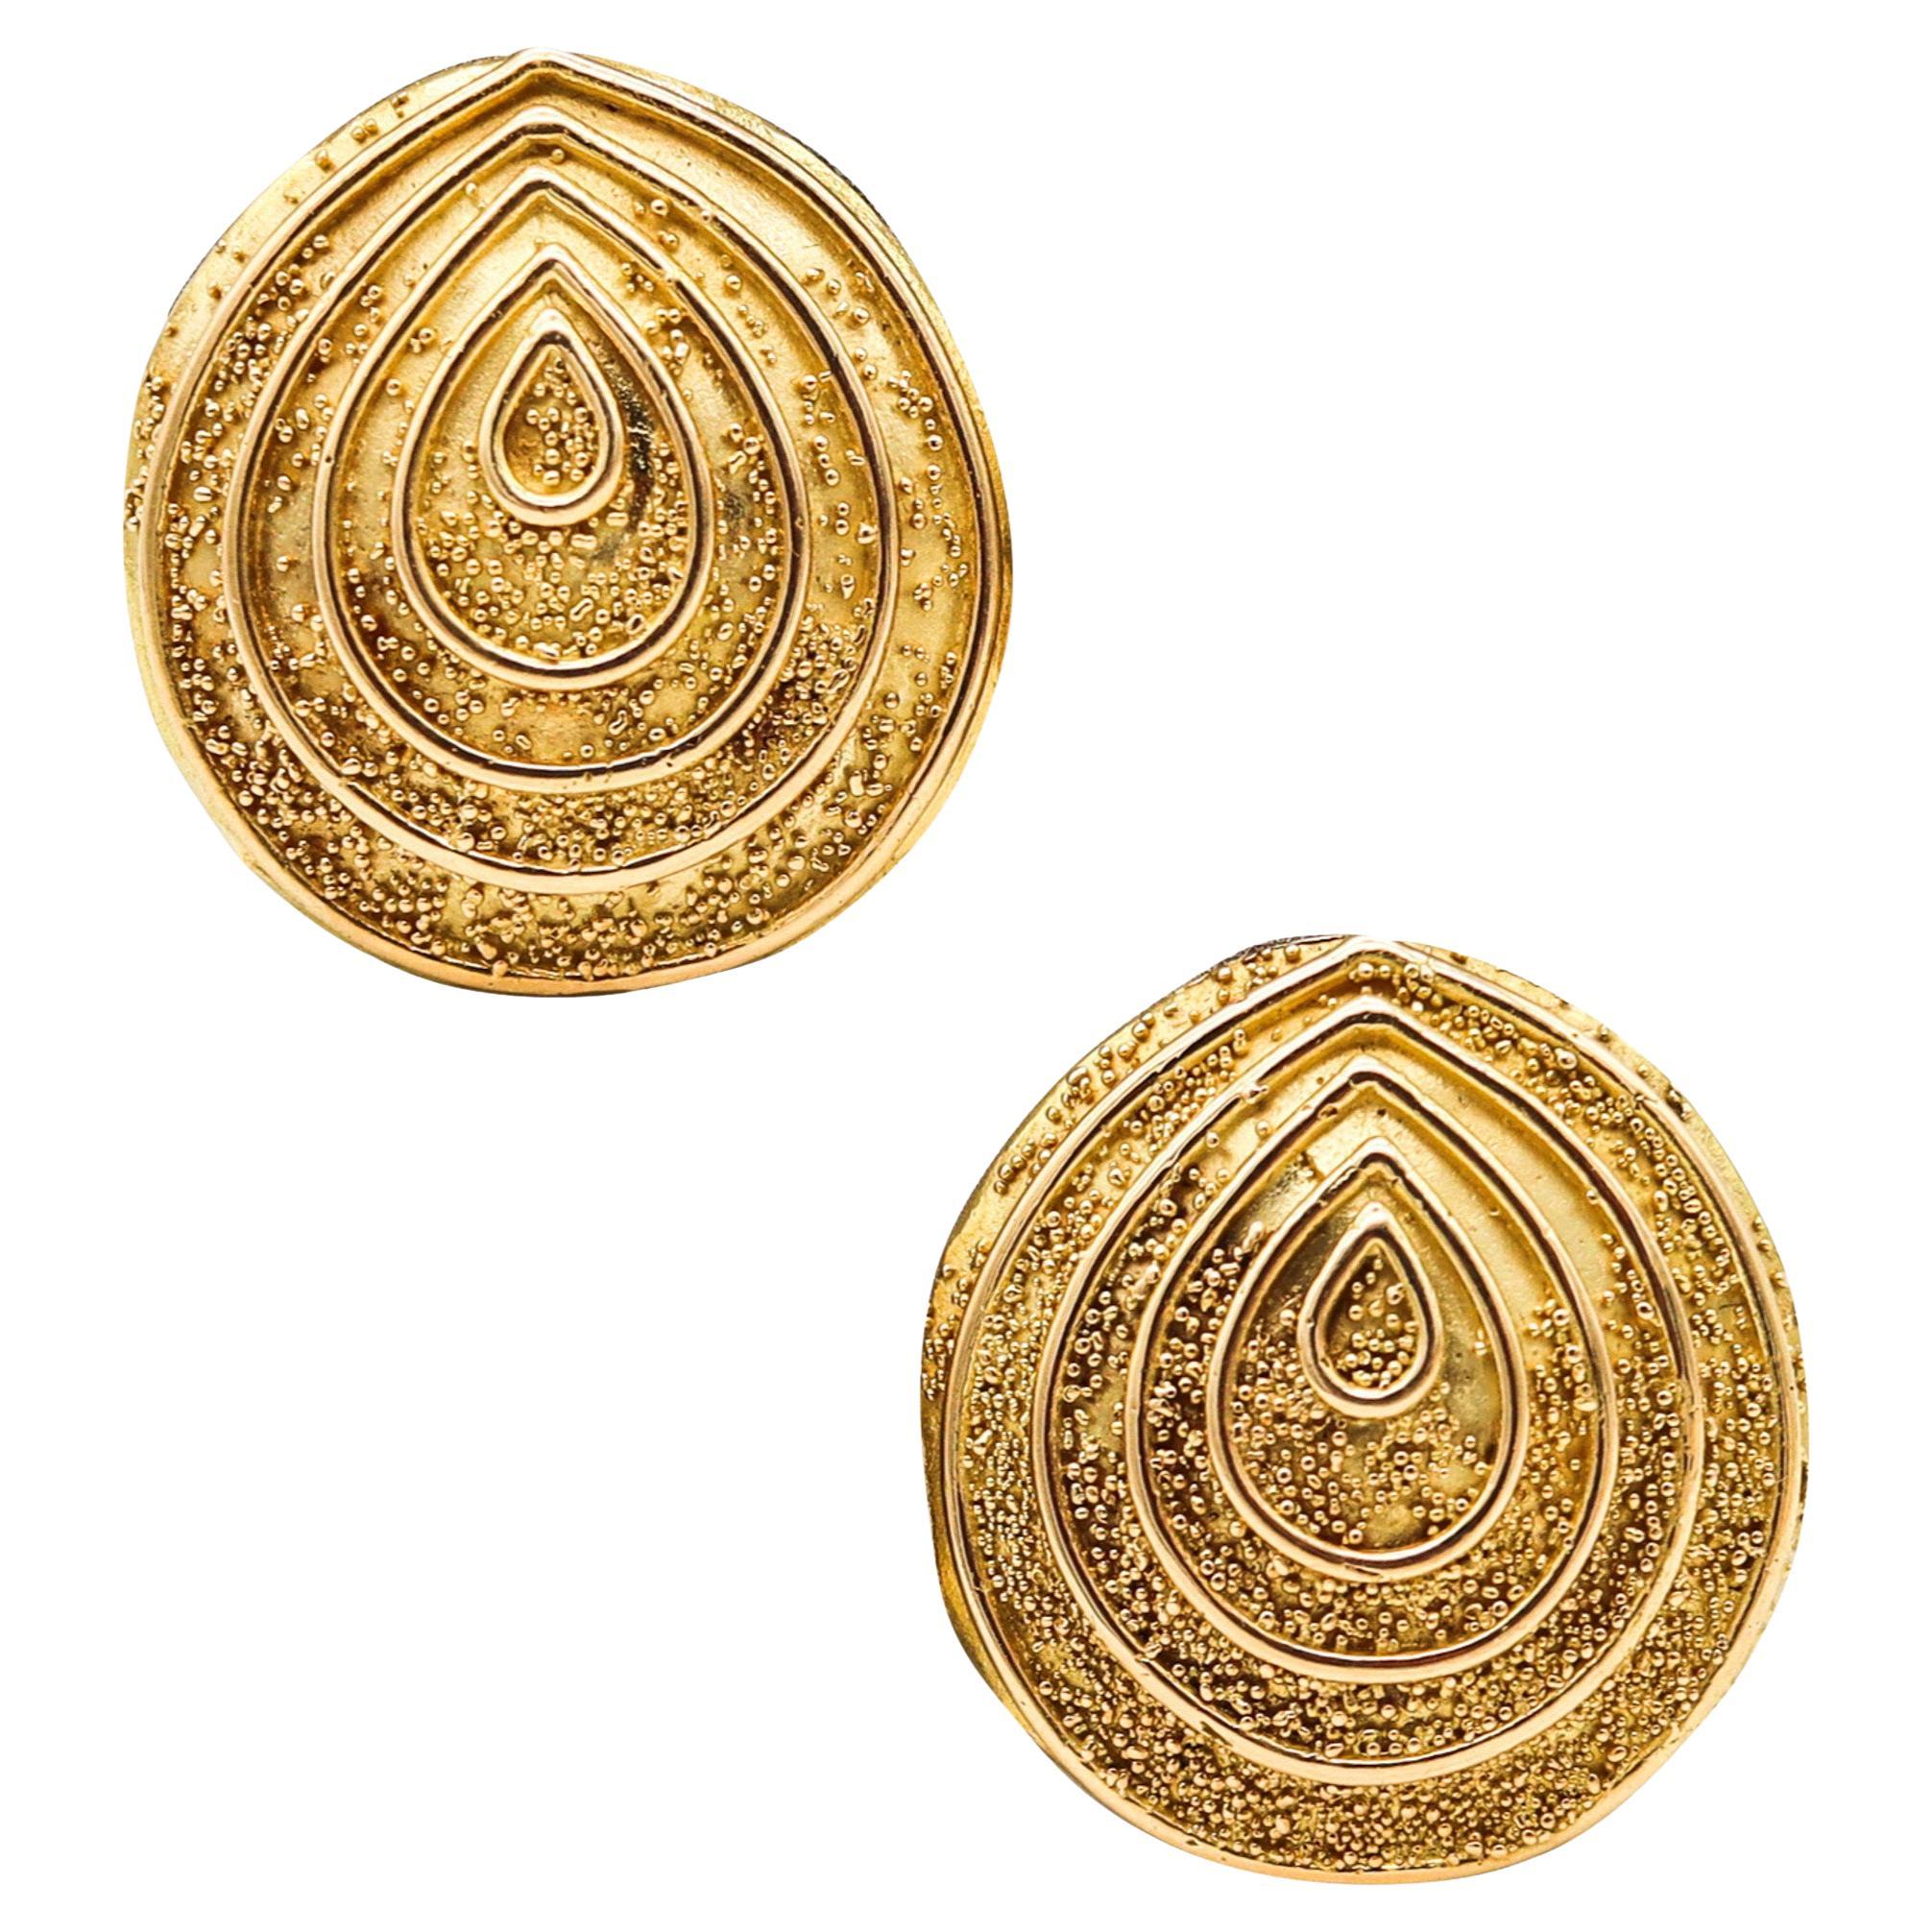 Elizabeth Gage England Sculptural Clip On Earrings In Textured 18Kt Yellow Gold